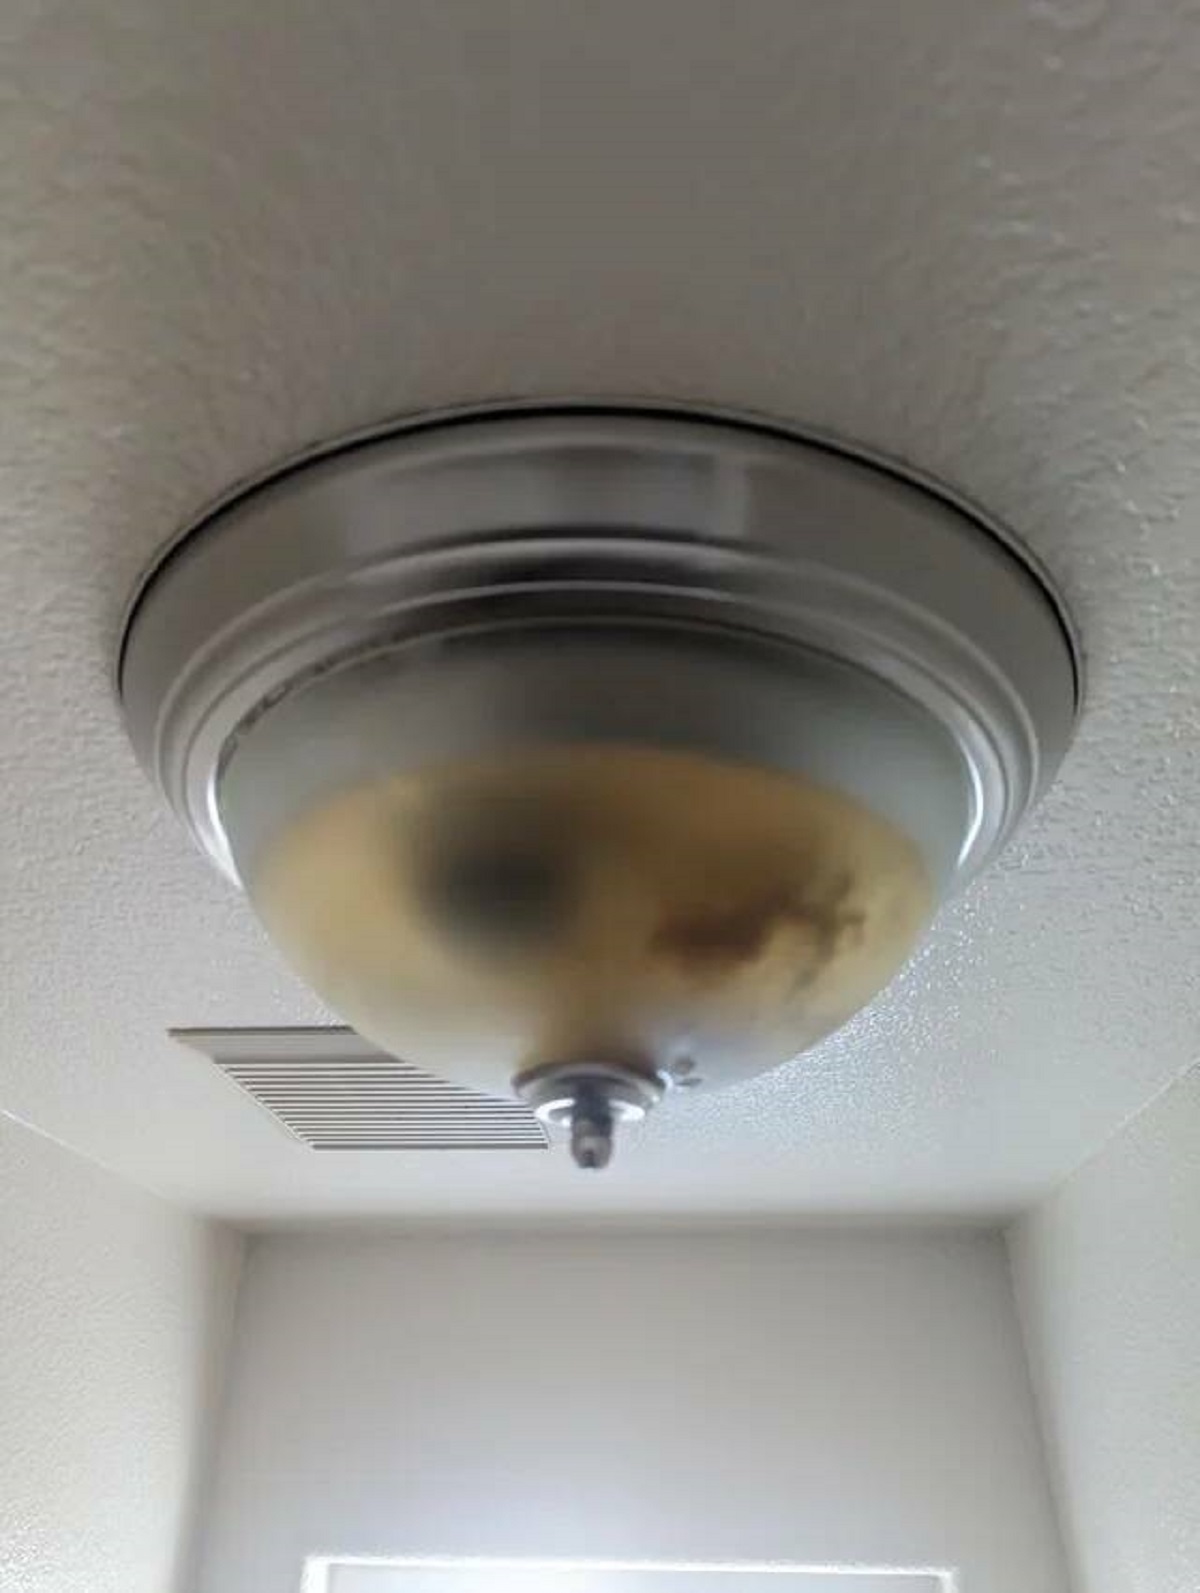 "First, we noticed a leak in the ceiling. Then the light wouldn't turn on."